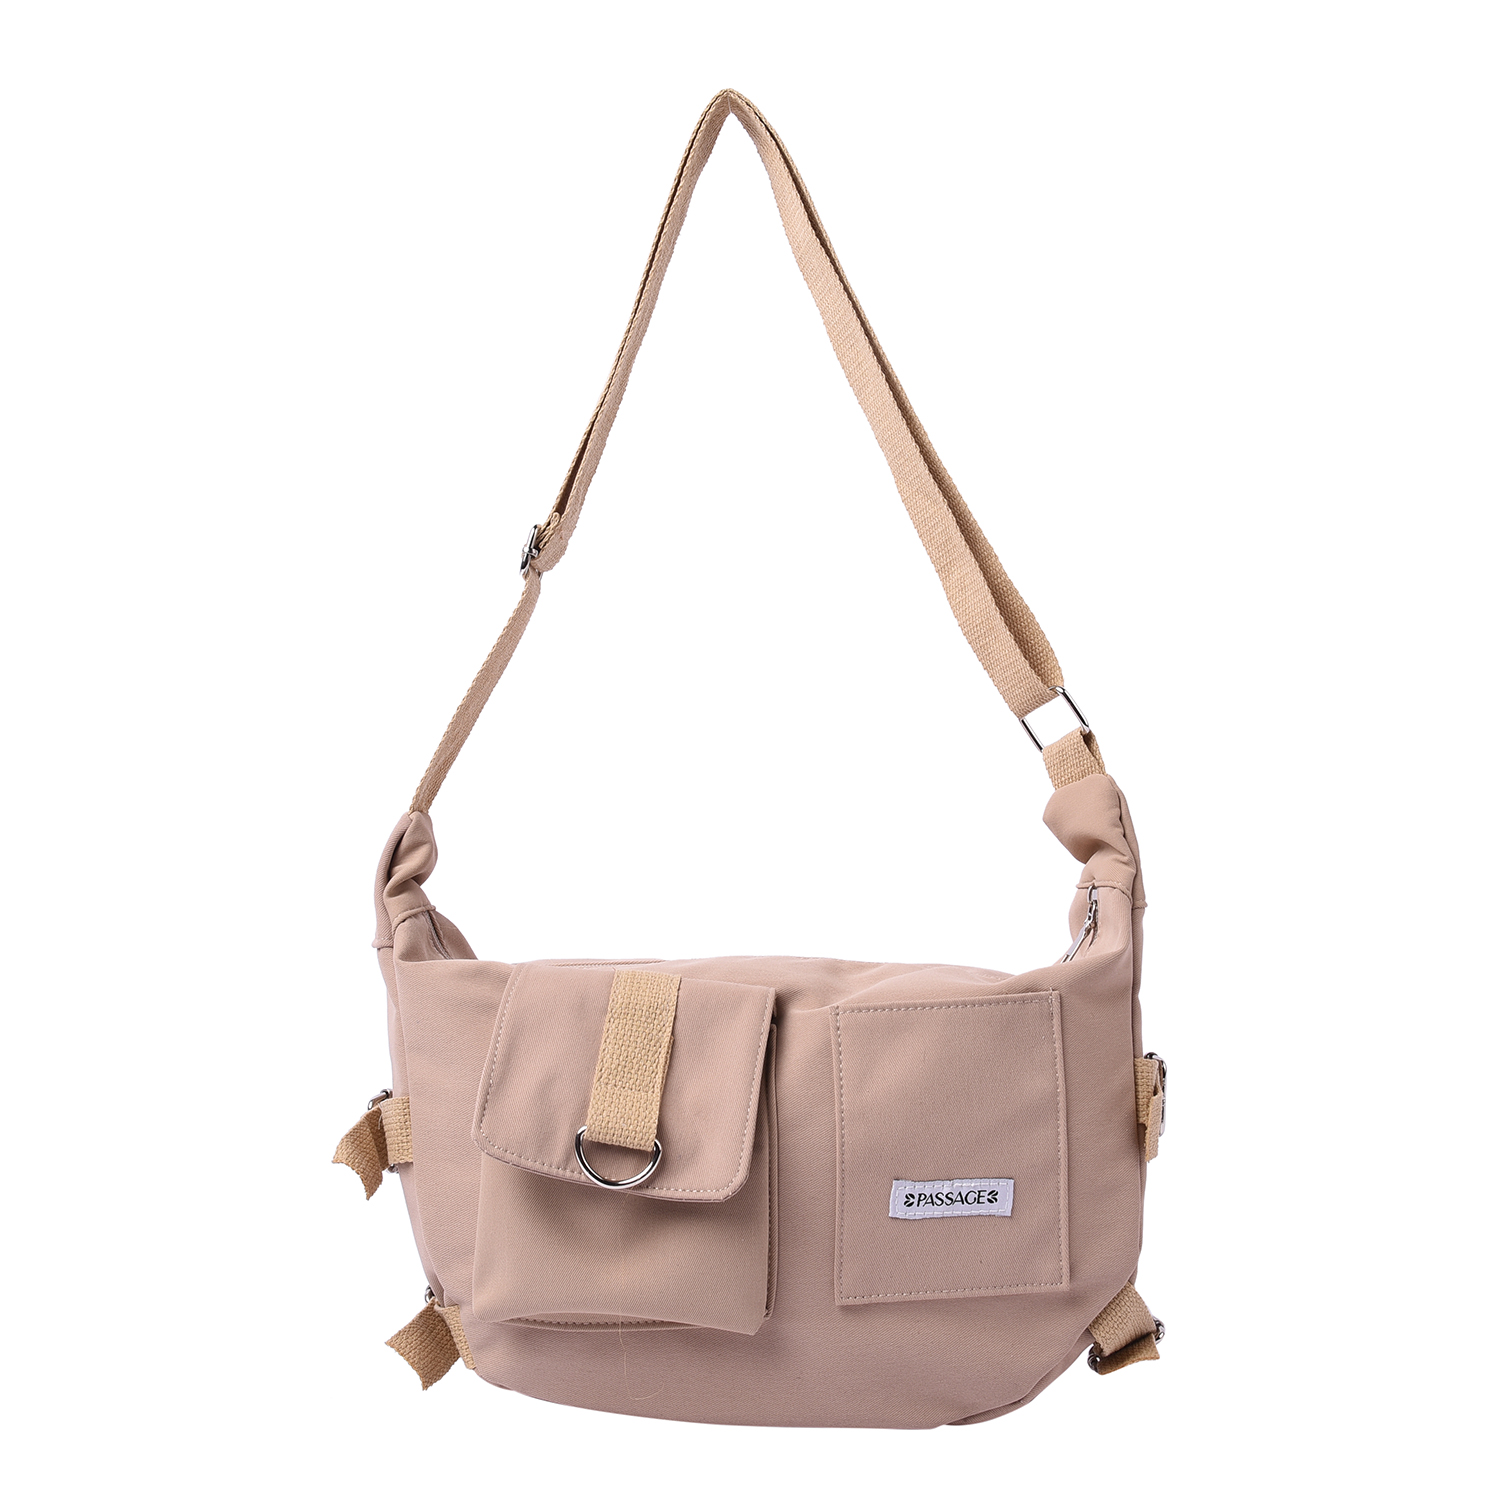 PASSAGE Beige Colour Crossbody Bag with Flap and Slip Pockets in Front and Zipper Pocket in Back (36x11x24cm)